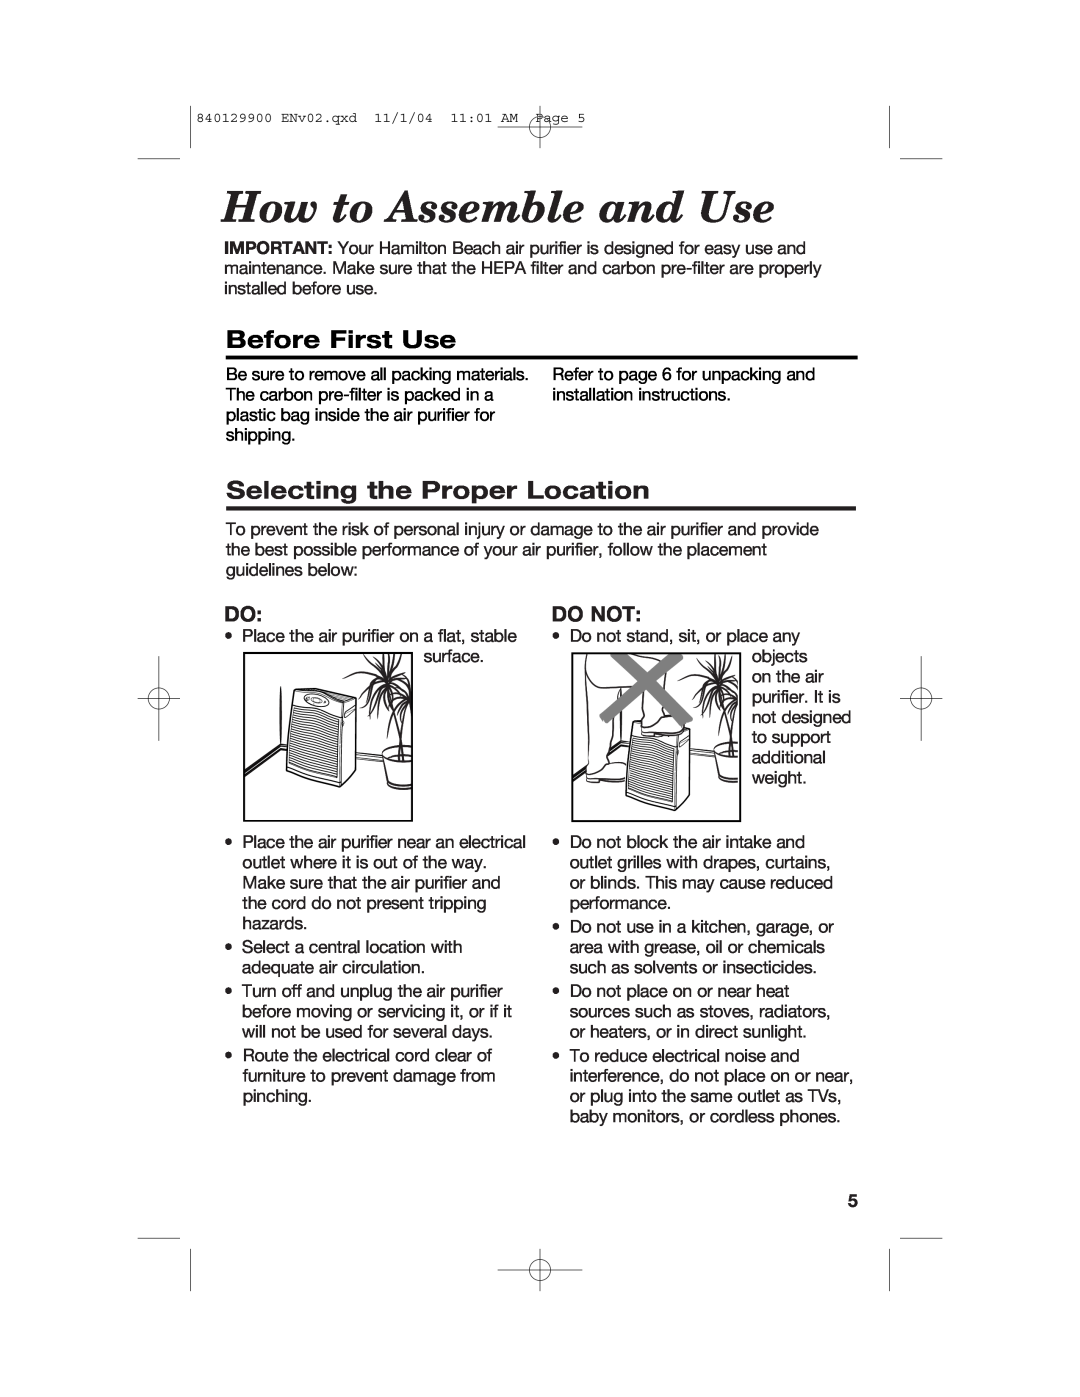 Hamilton Beach 04161, 04162, 04160 manual How to Assemble and Use, Before First Use, Selecting the Proper Location, Do Not 